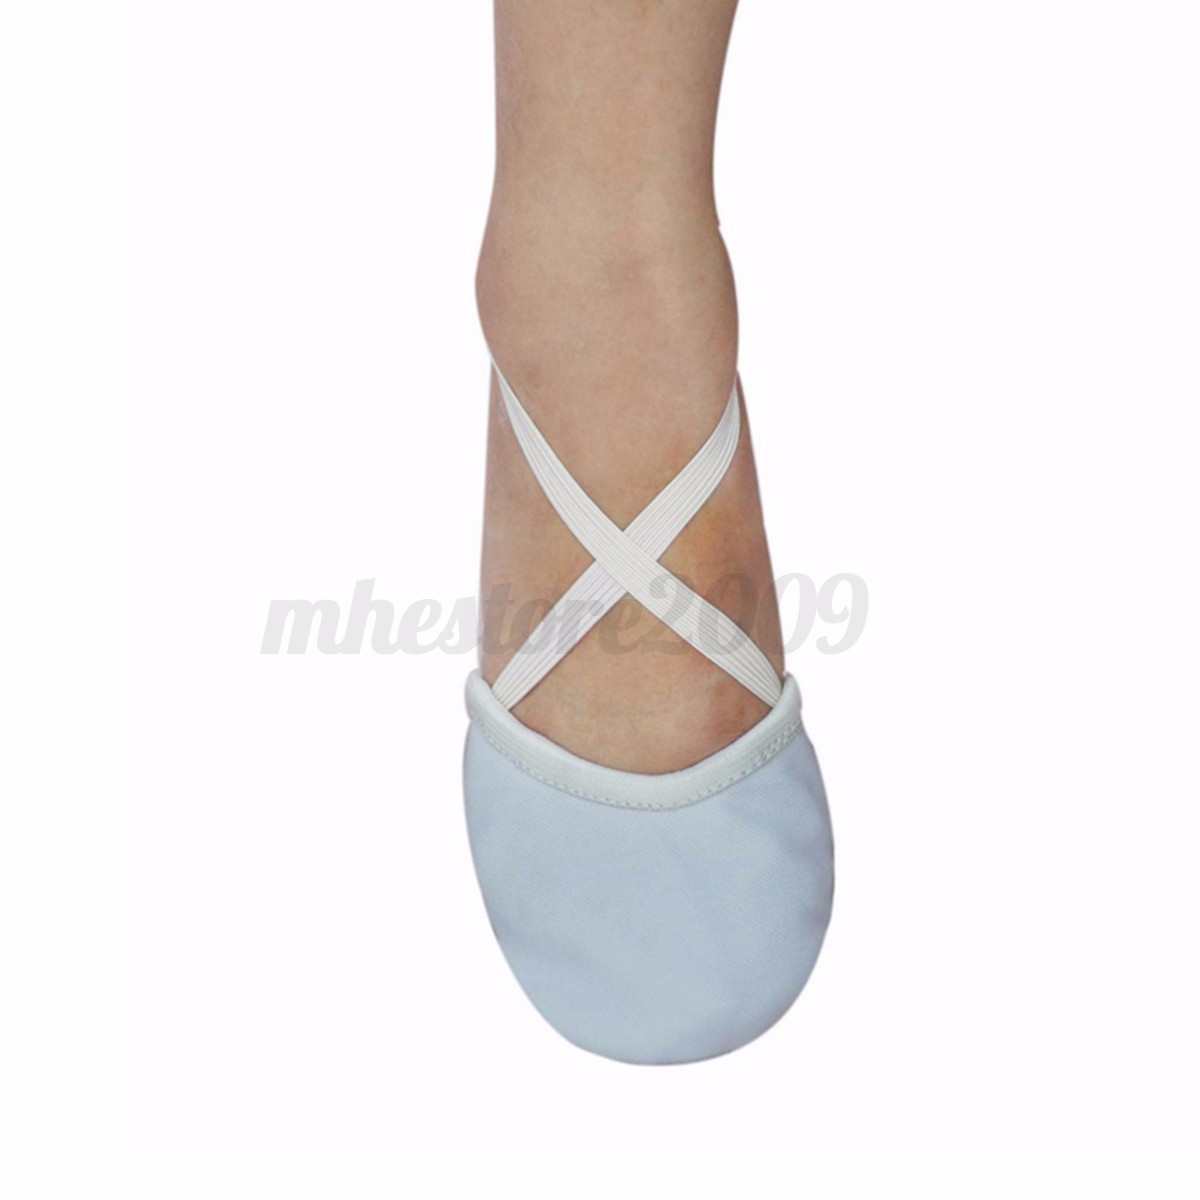 ballet slippers with arch support